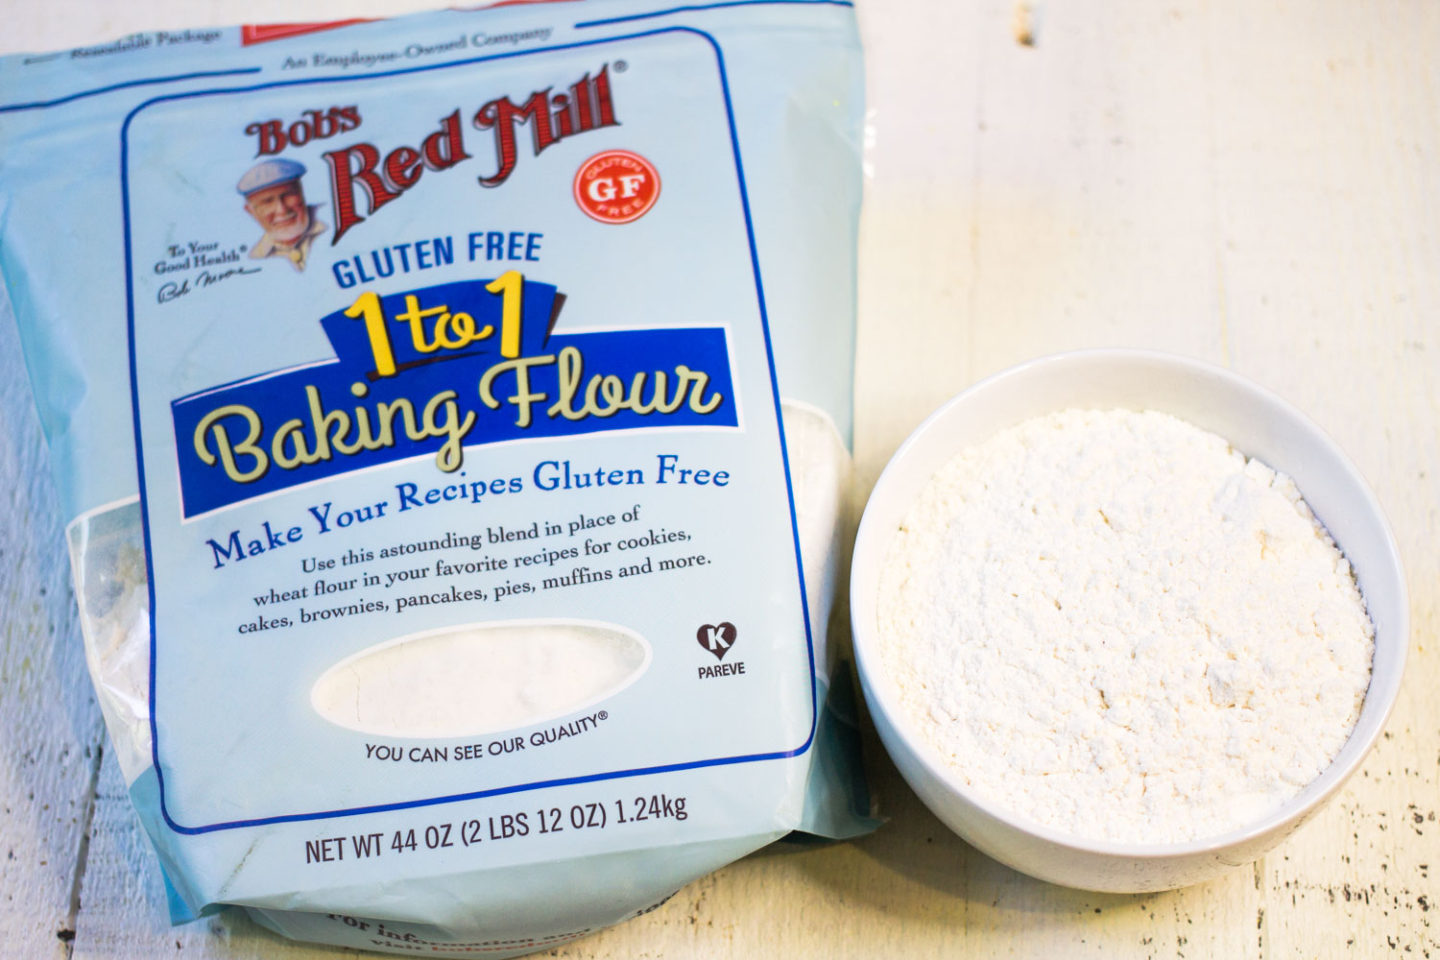 Bob's Red Mill 1 to 1 Gluten-Free Baking Flour with a small white bowl of flour